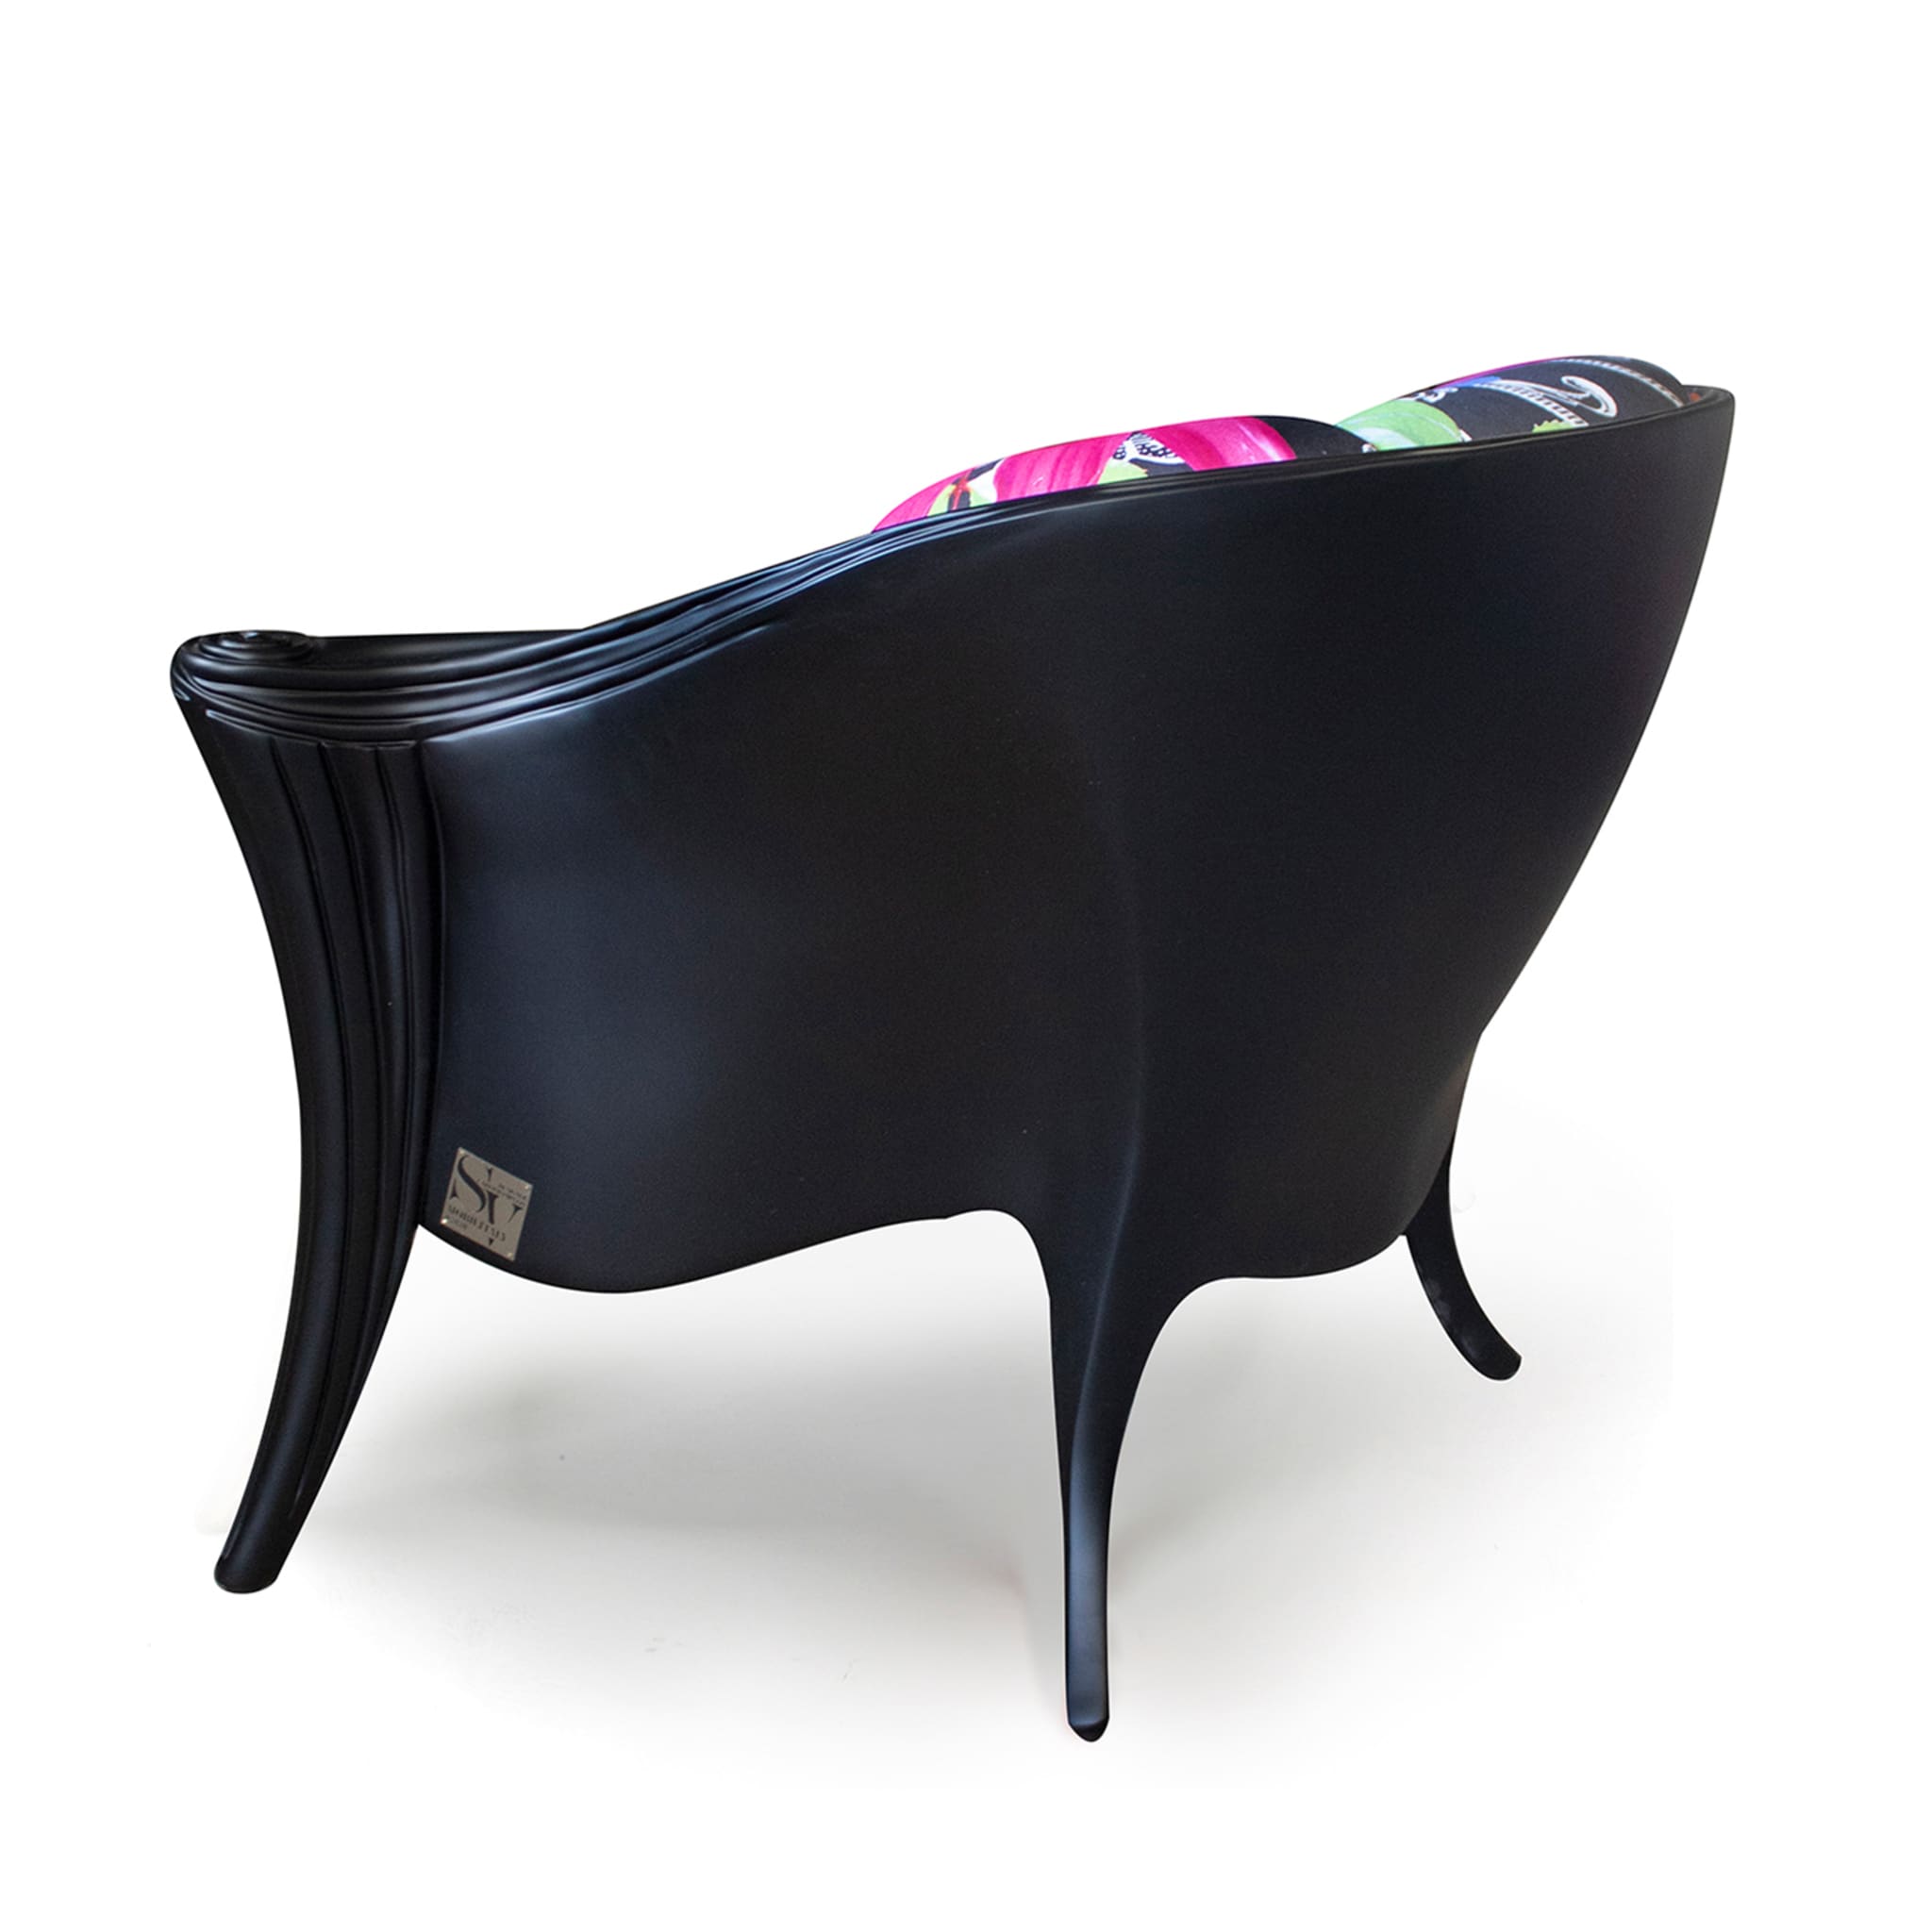 Opus Futura Black Flower and lacquer armchair By Carlo Rampazzi - Alternative view 2